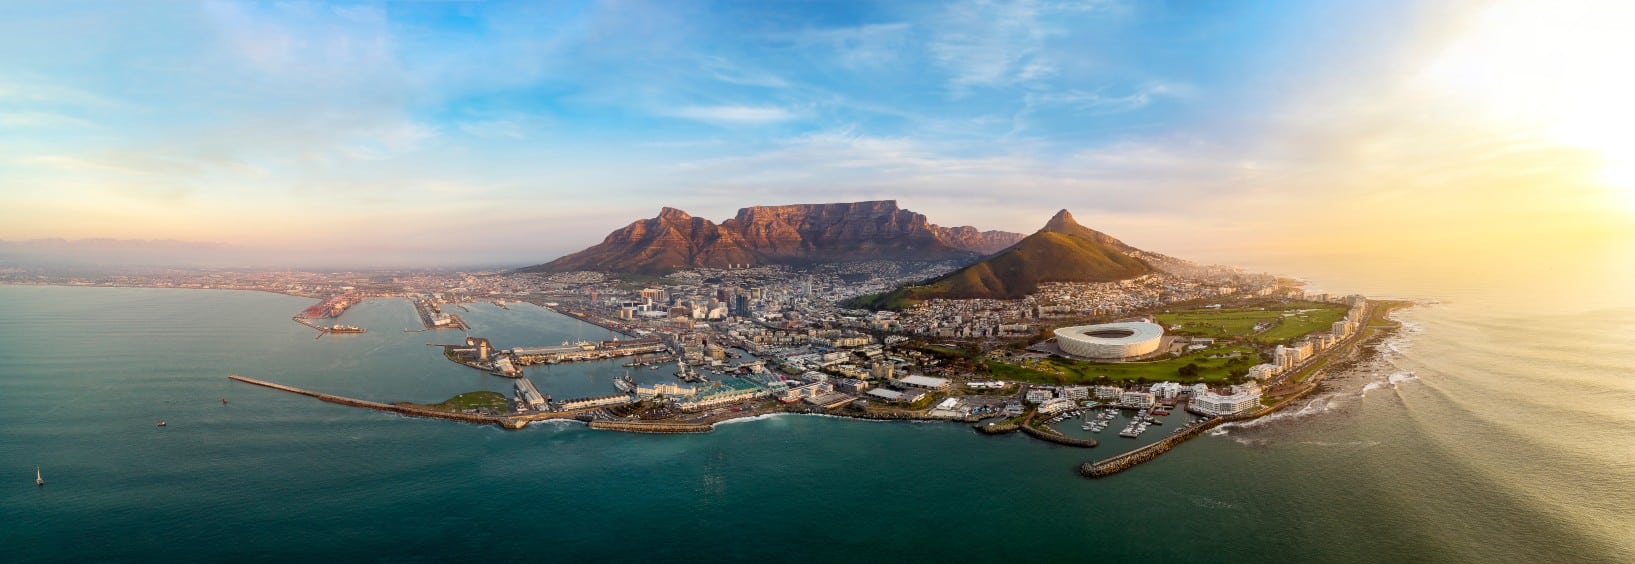 VPN in South Africa - Cape Town